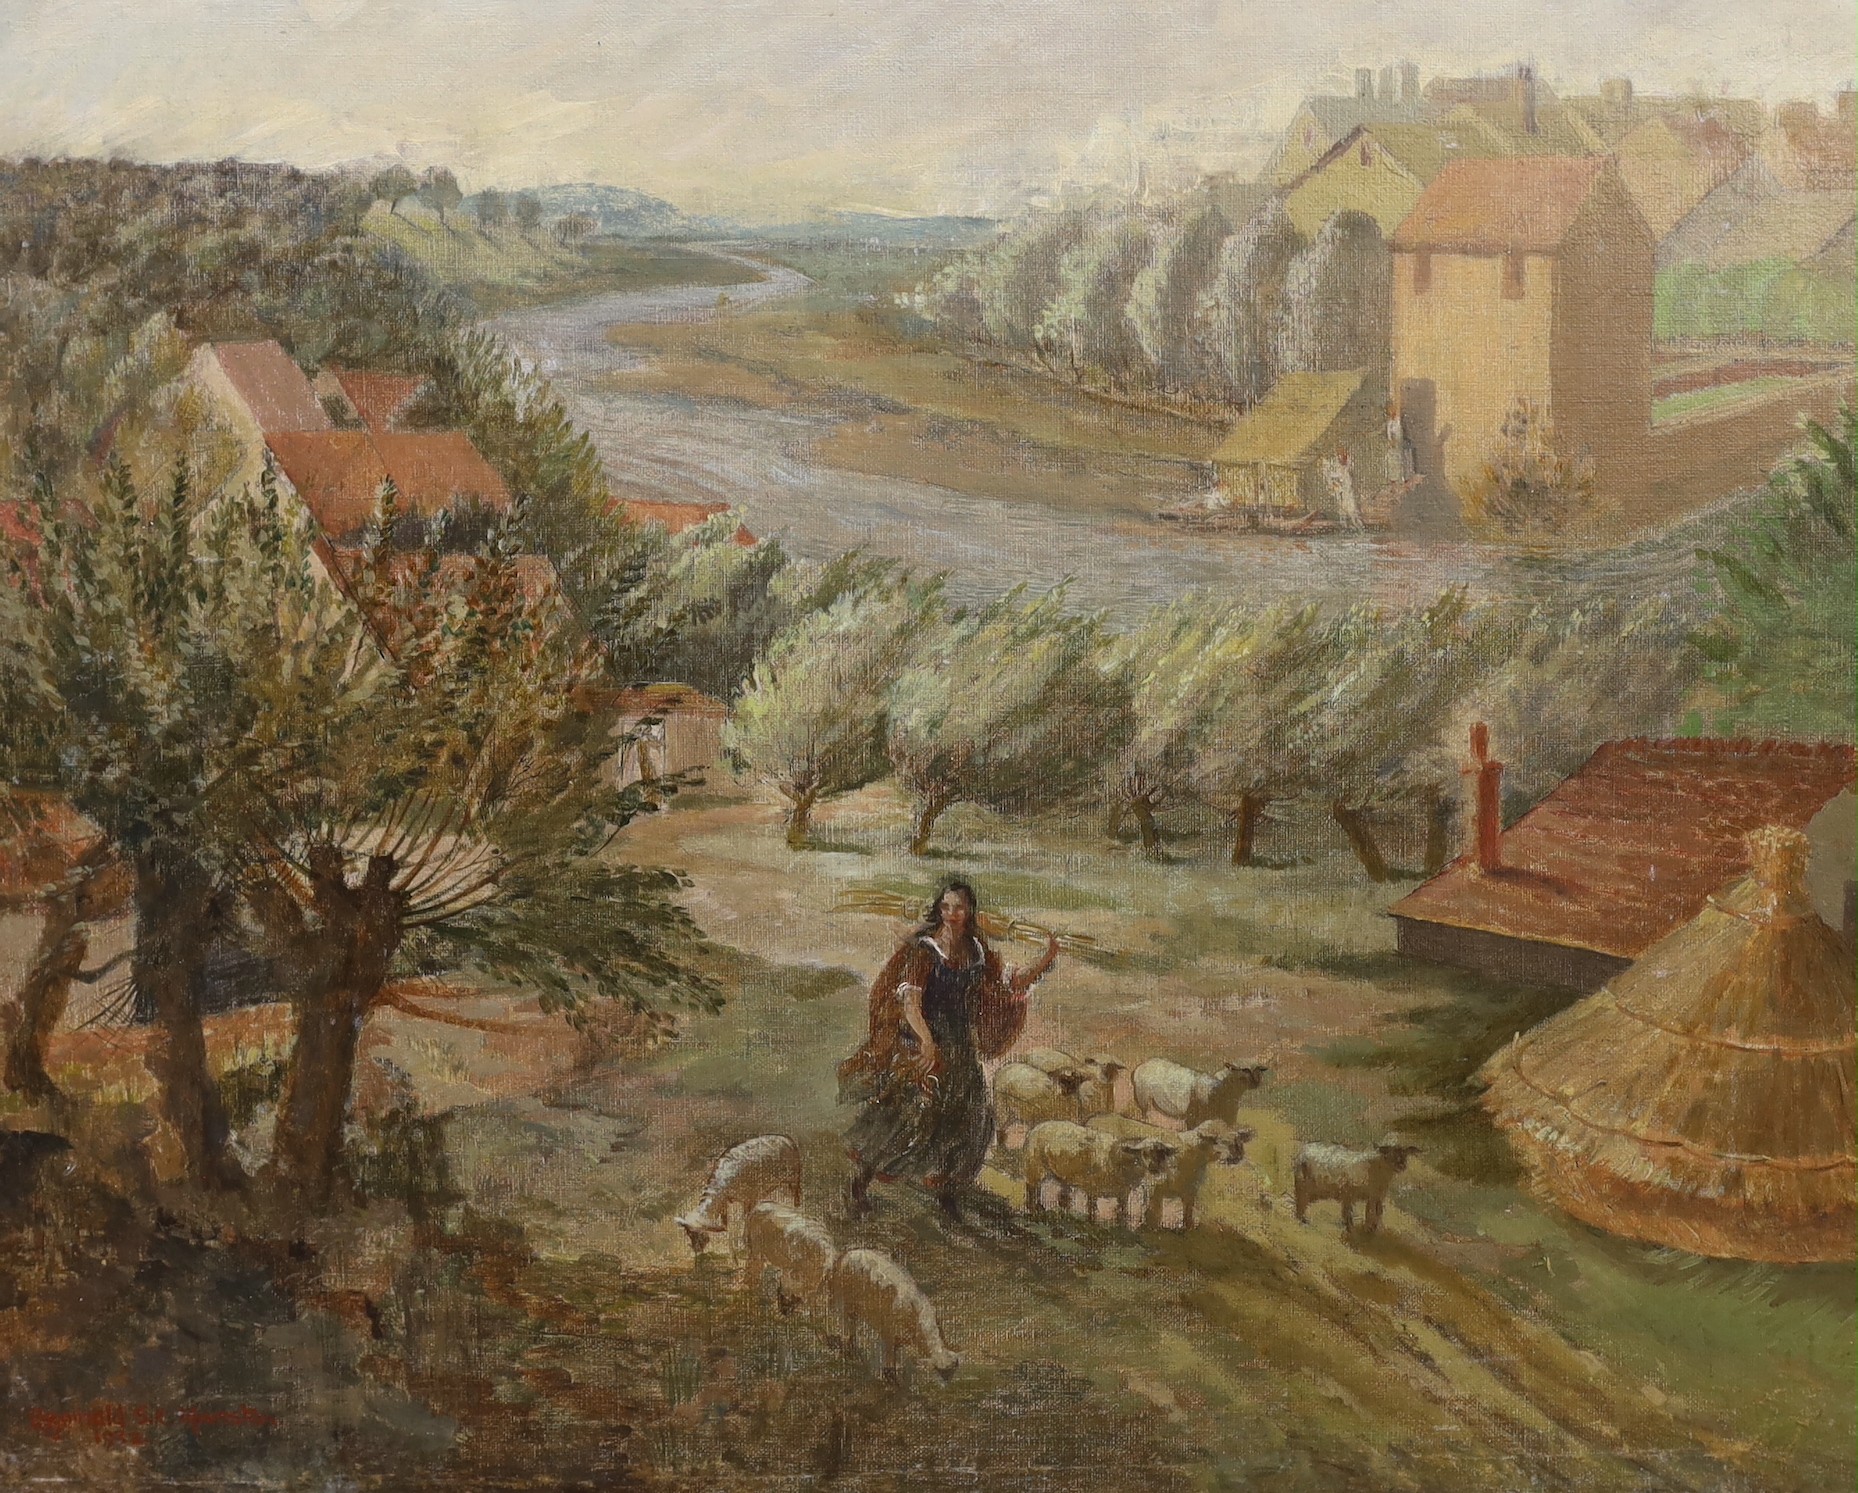 Reginald St. Clair Marston (1886-1943), oil on canvas, Shepherdess in a landscape, signed and dated 1932, 58 x 73cm, unframed